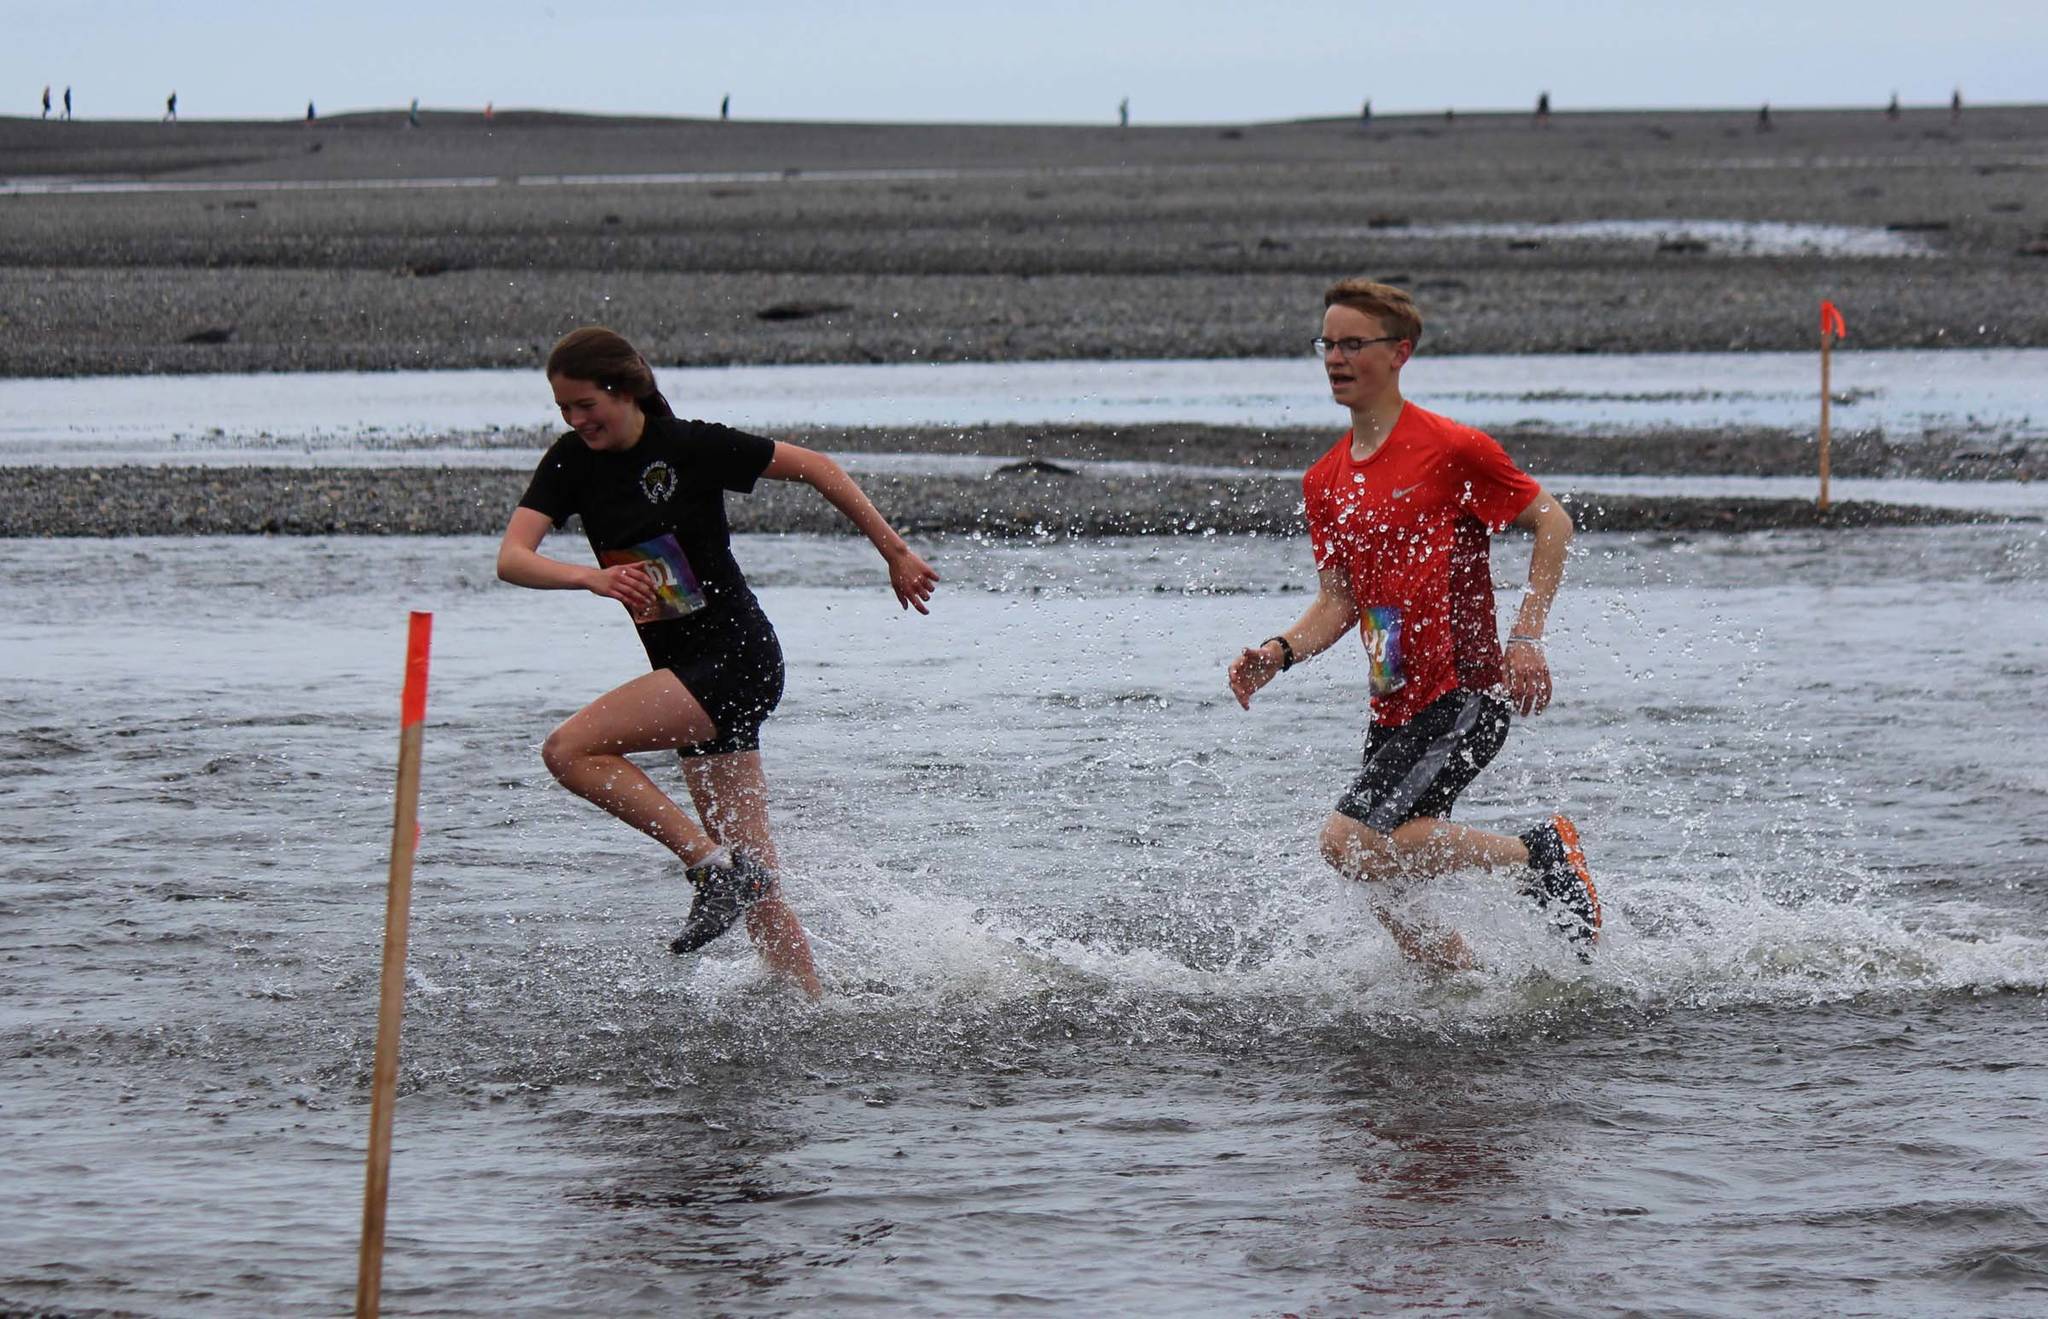 Leah Fallon, left, and Tyler Hippchen, right, dash through the chilly water of Deep Creek in the Clam Scramble, held Saturday, June 15, 2019, in Ninilchik, Alaska. Fallon finished ninth overall and was the first female finisher with a time of 29 minutes, 42 seconds. Hippchen finished seventh overall in 29:36.(Photo by McKibben Jackinsky)